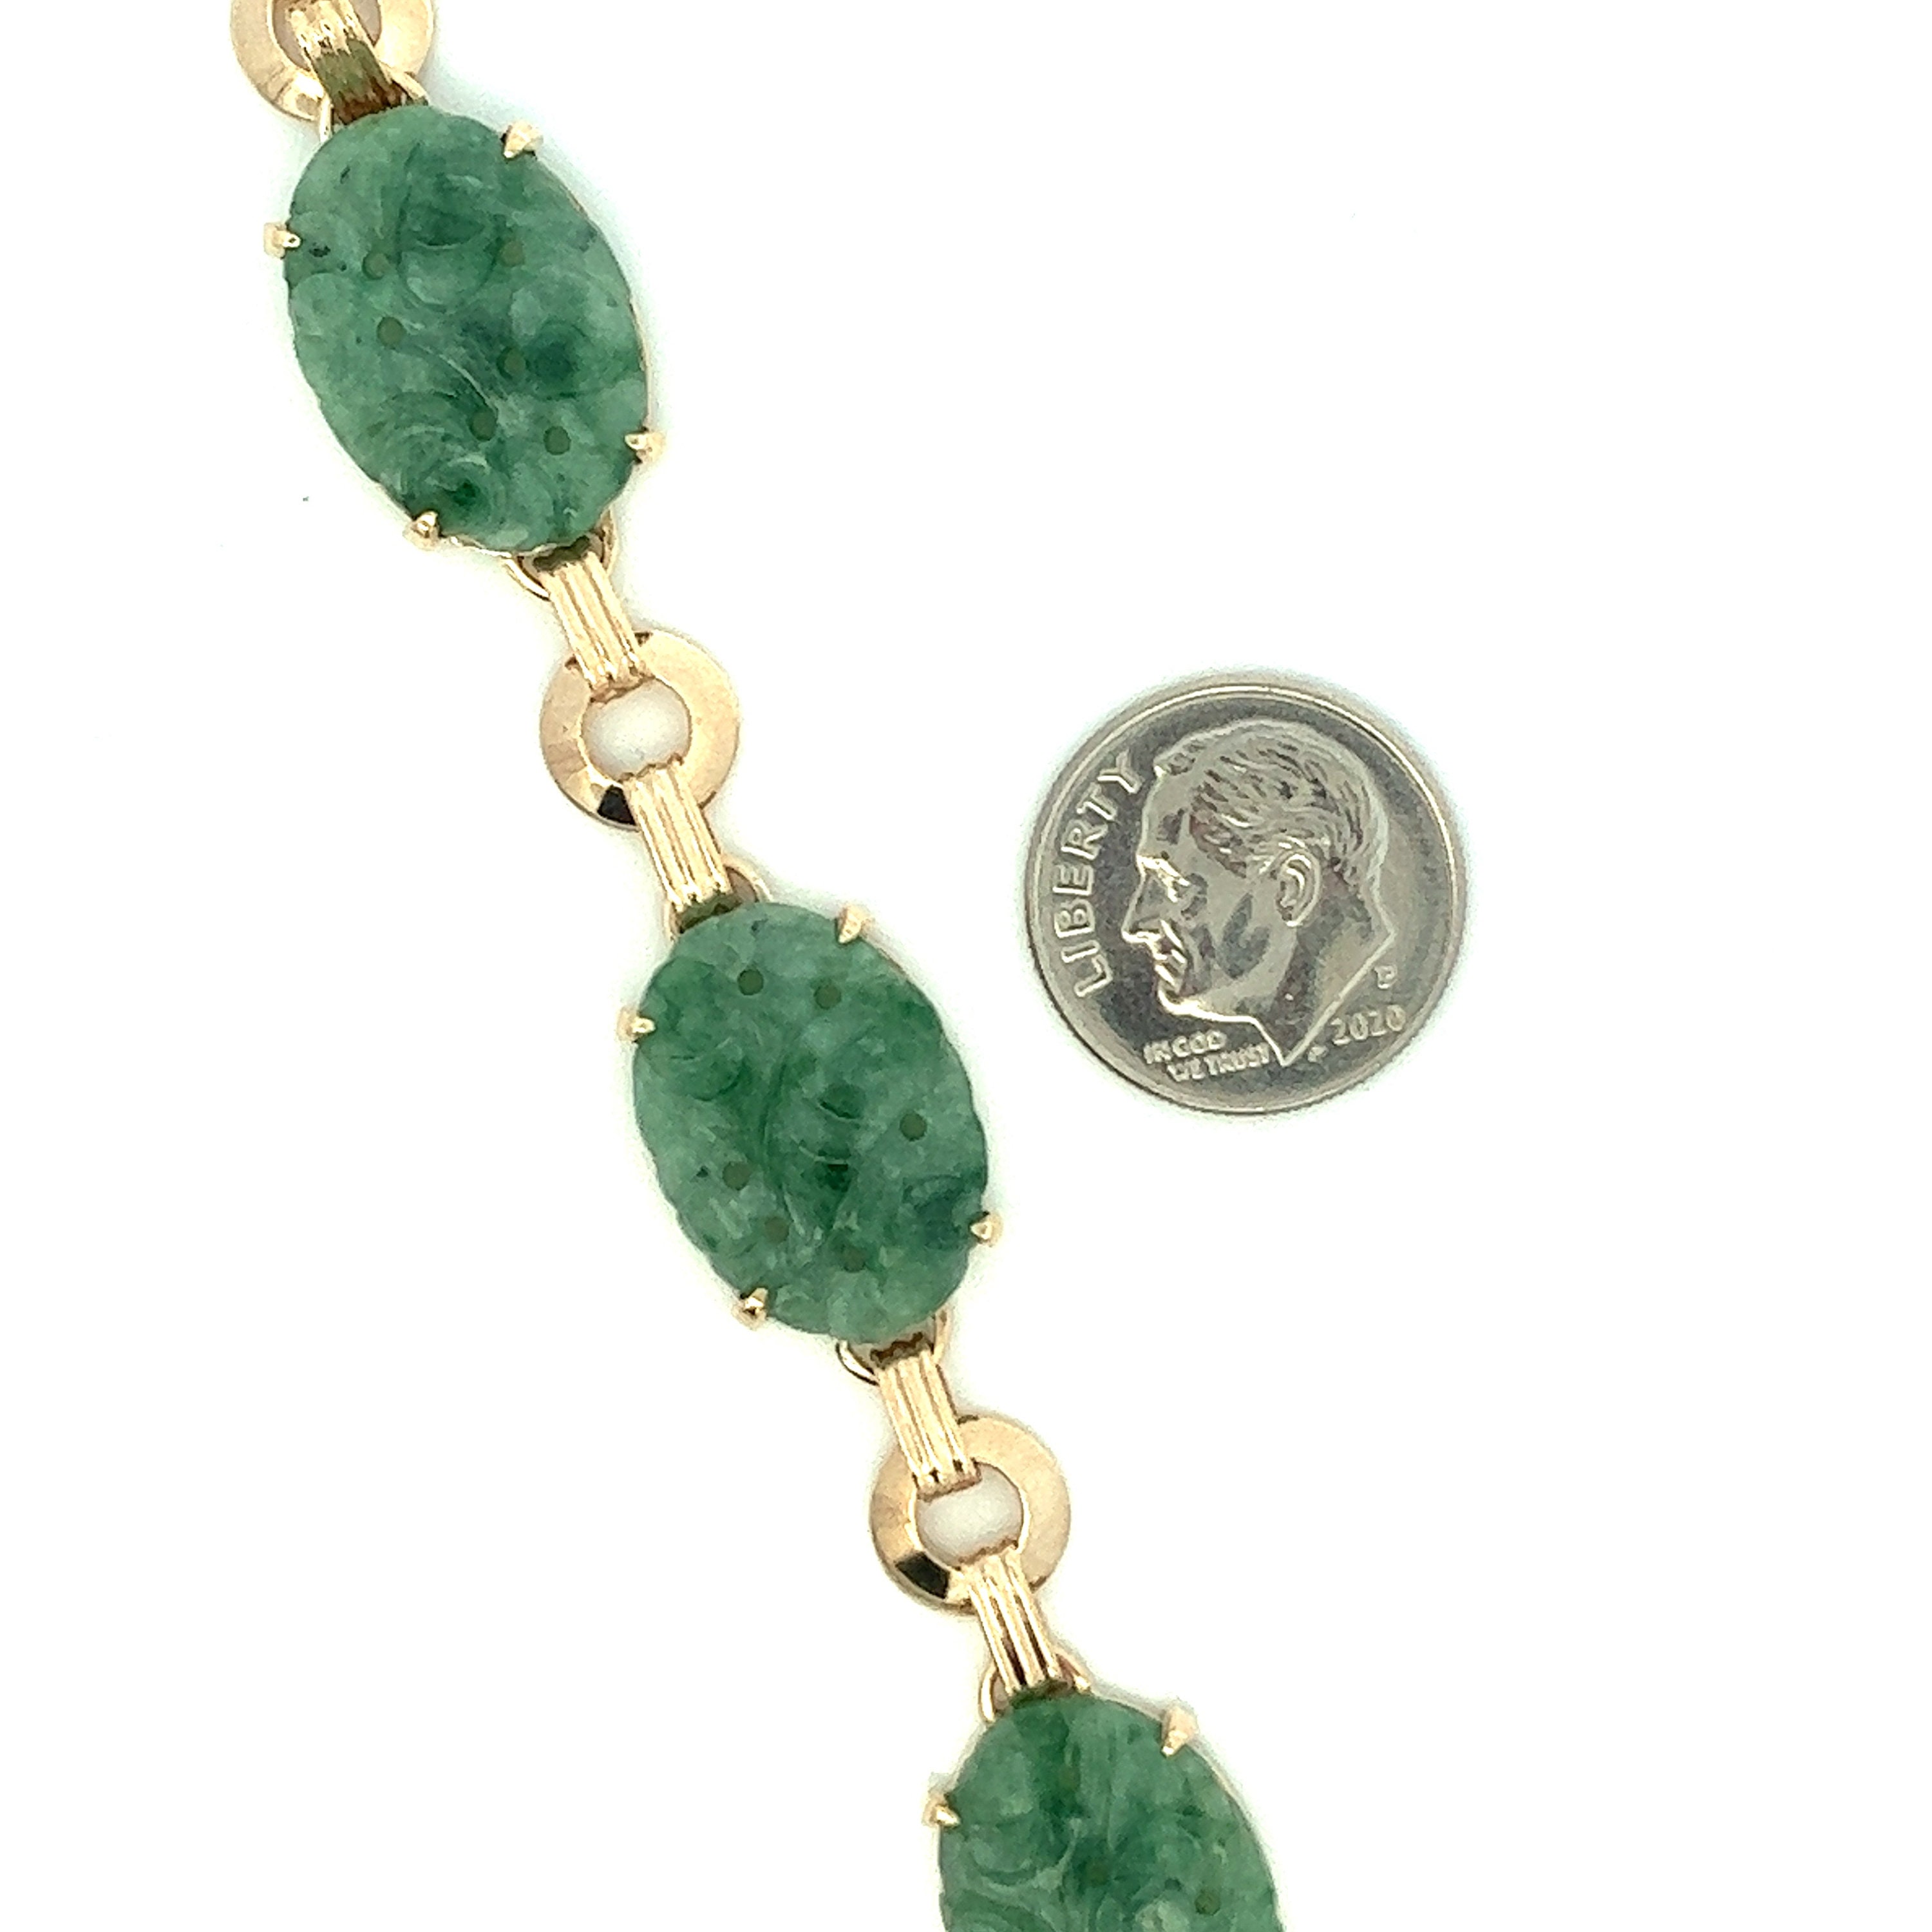 Certified 6.94 Cts Lucky Jade and White Gold Bracelet, Patches of